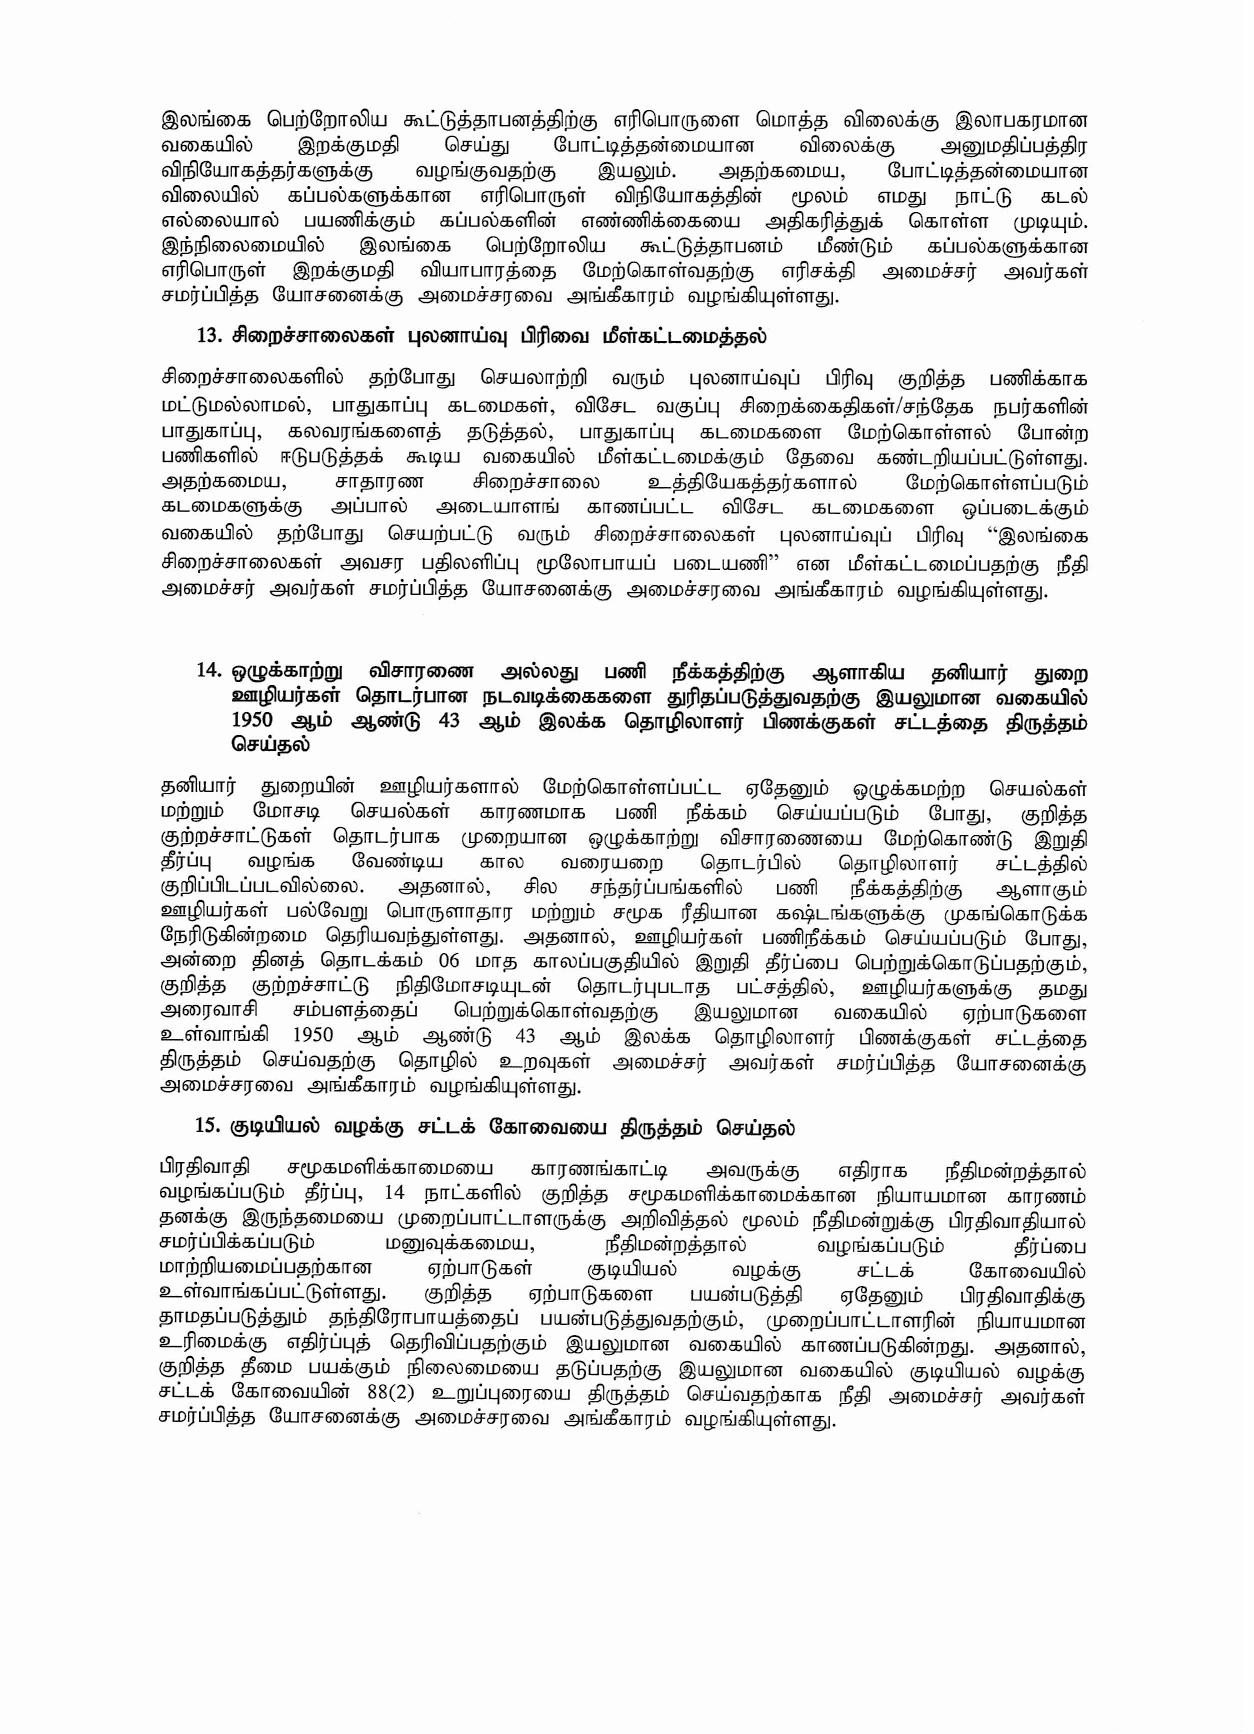 Cabinet Decision on 01.02.2021 Tamil page 005